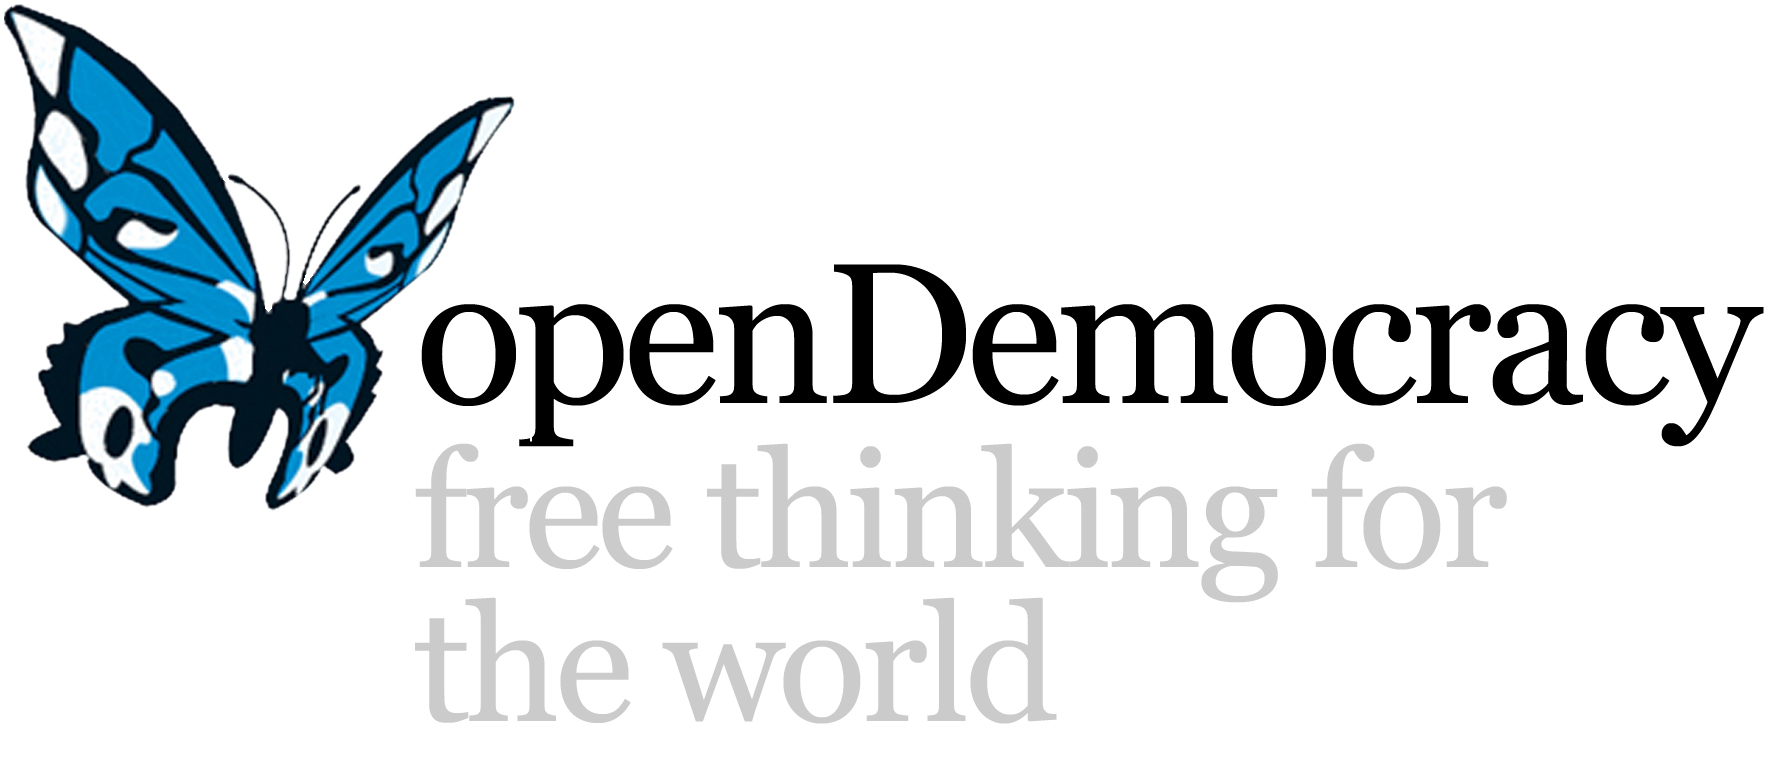 Sharia law, apostasy and secularism, Open Democracy, 12 February 2015